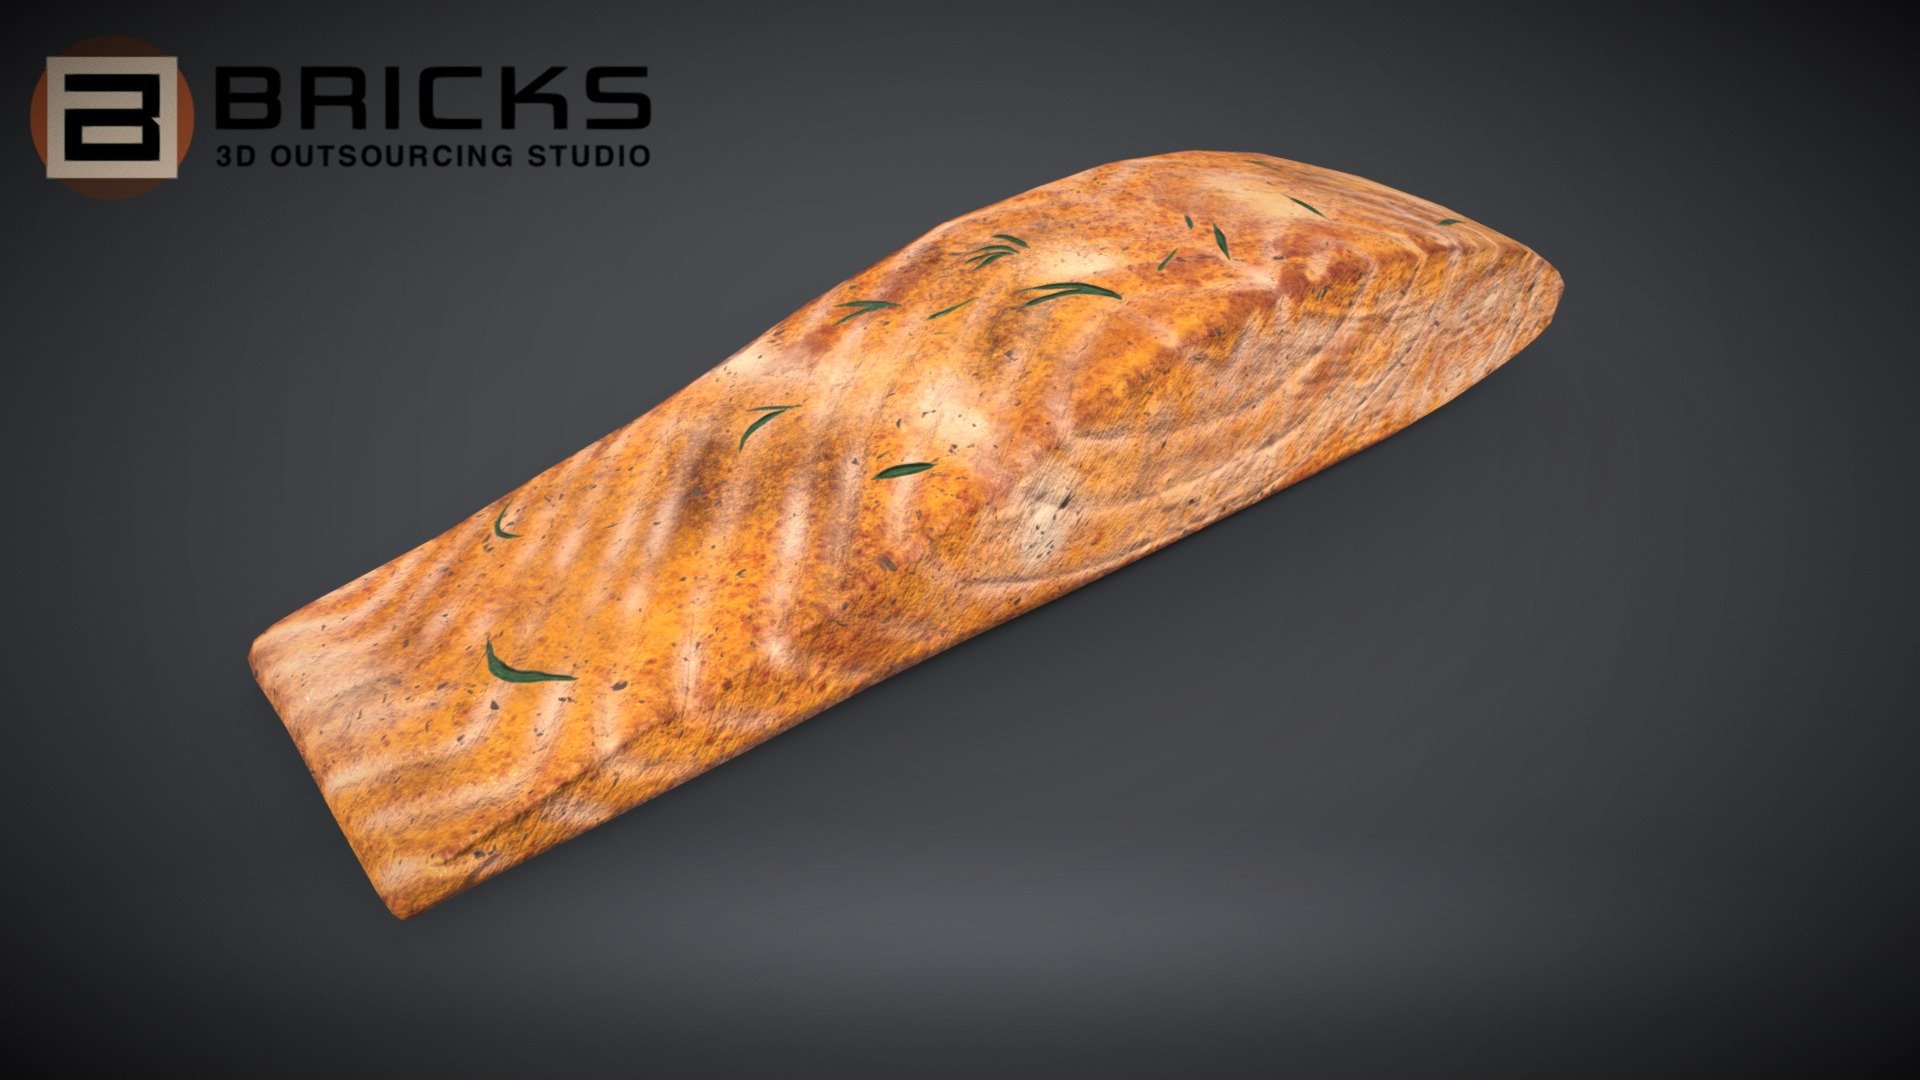 PBR Food Asset:
SalmonCaperSkillet
Polycount: 544
Vertex count: 322
Texture Size: 2048px x 2048px
Normal: OpenGL

If you need any adjust in file please contact us: team@bricks3dstudio.com

Hire us: tringuyen@bricks3dstudio.com
Here is us: https://www.bricks3dstudio.com/
        https://www.artstation.com/bricksstudio
        https://www.facebook.com/Bricks3dstudio/
        https://www.linkedin.com/in/bricks-studio-b10462252/ - SalmonCaperSkillet - Buy Royalty Free 3D model by Bricks Studio (@bricks3dstudio) 3d model